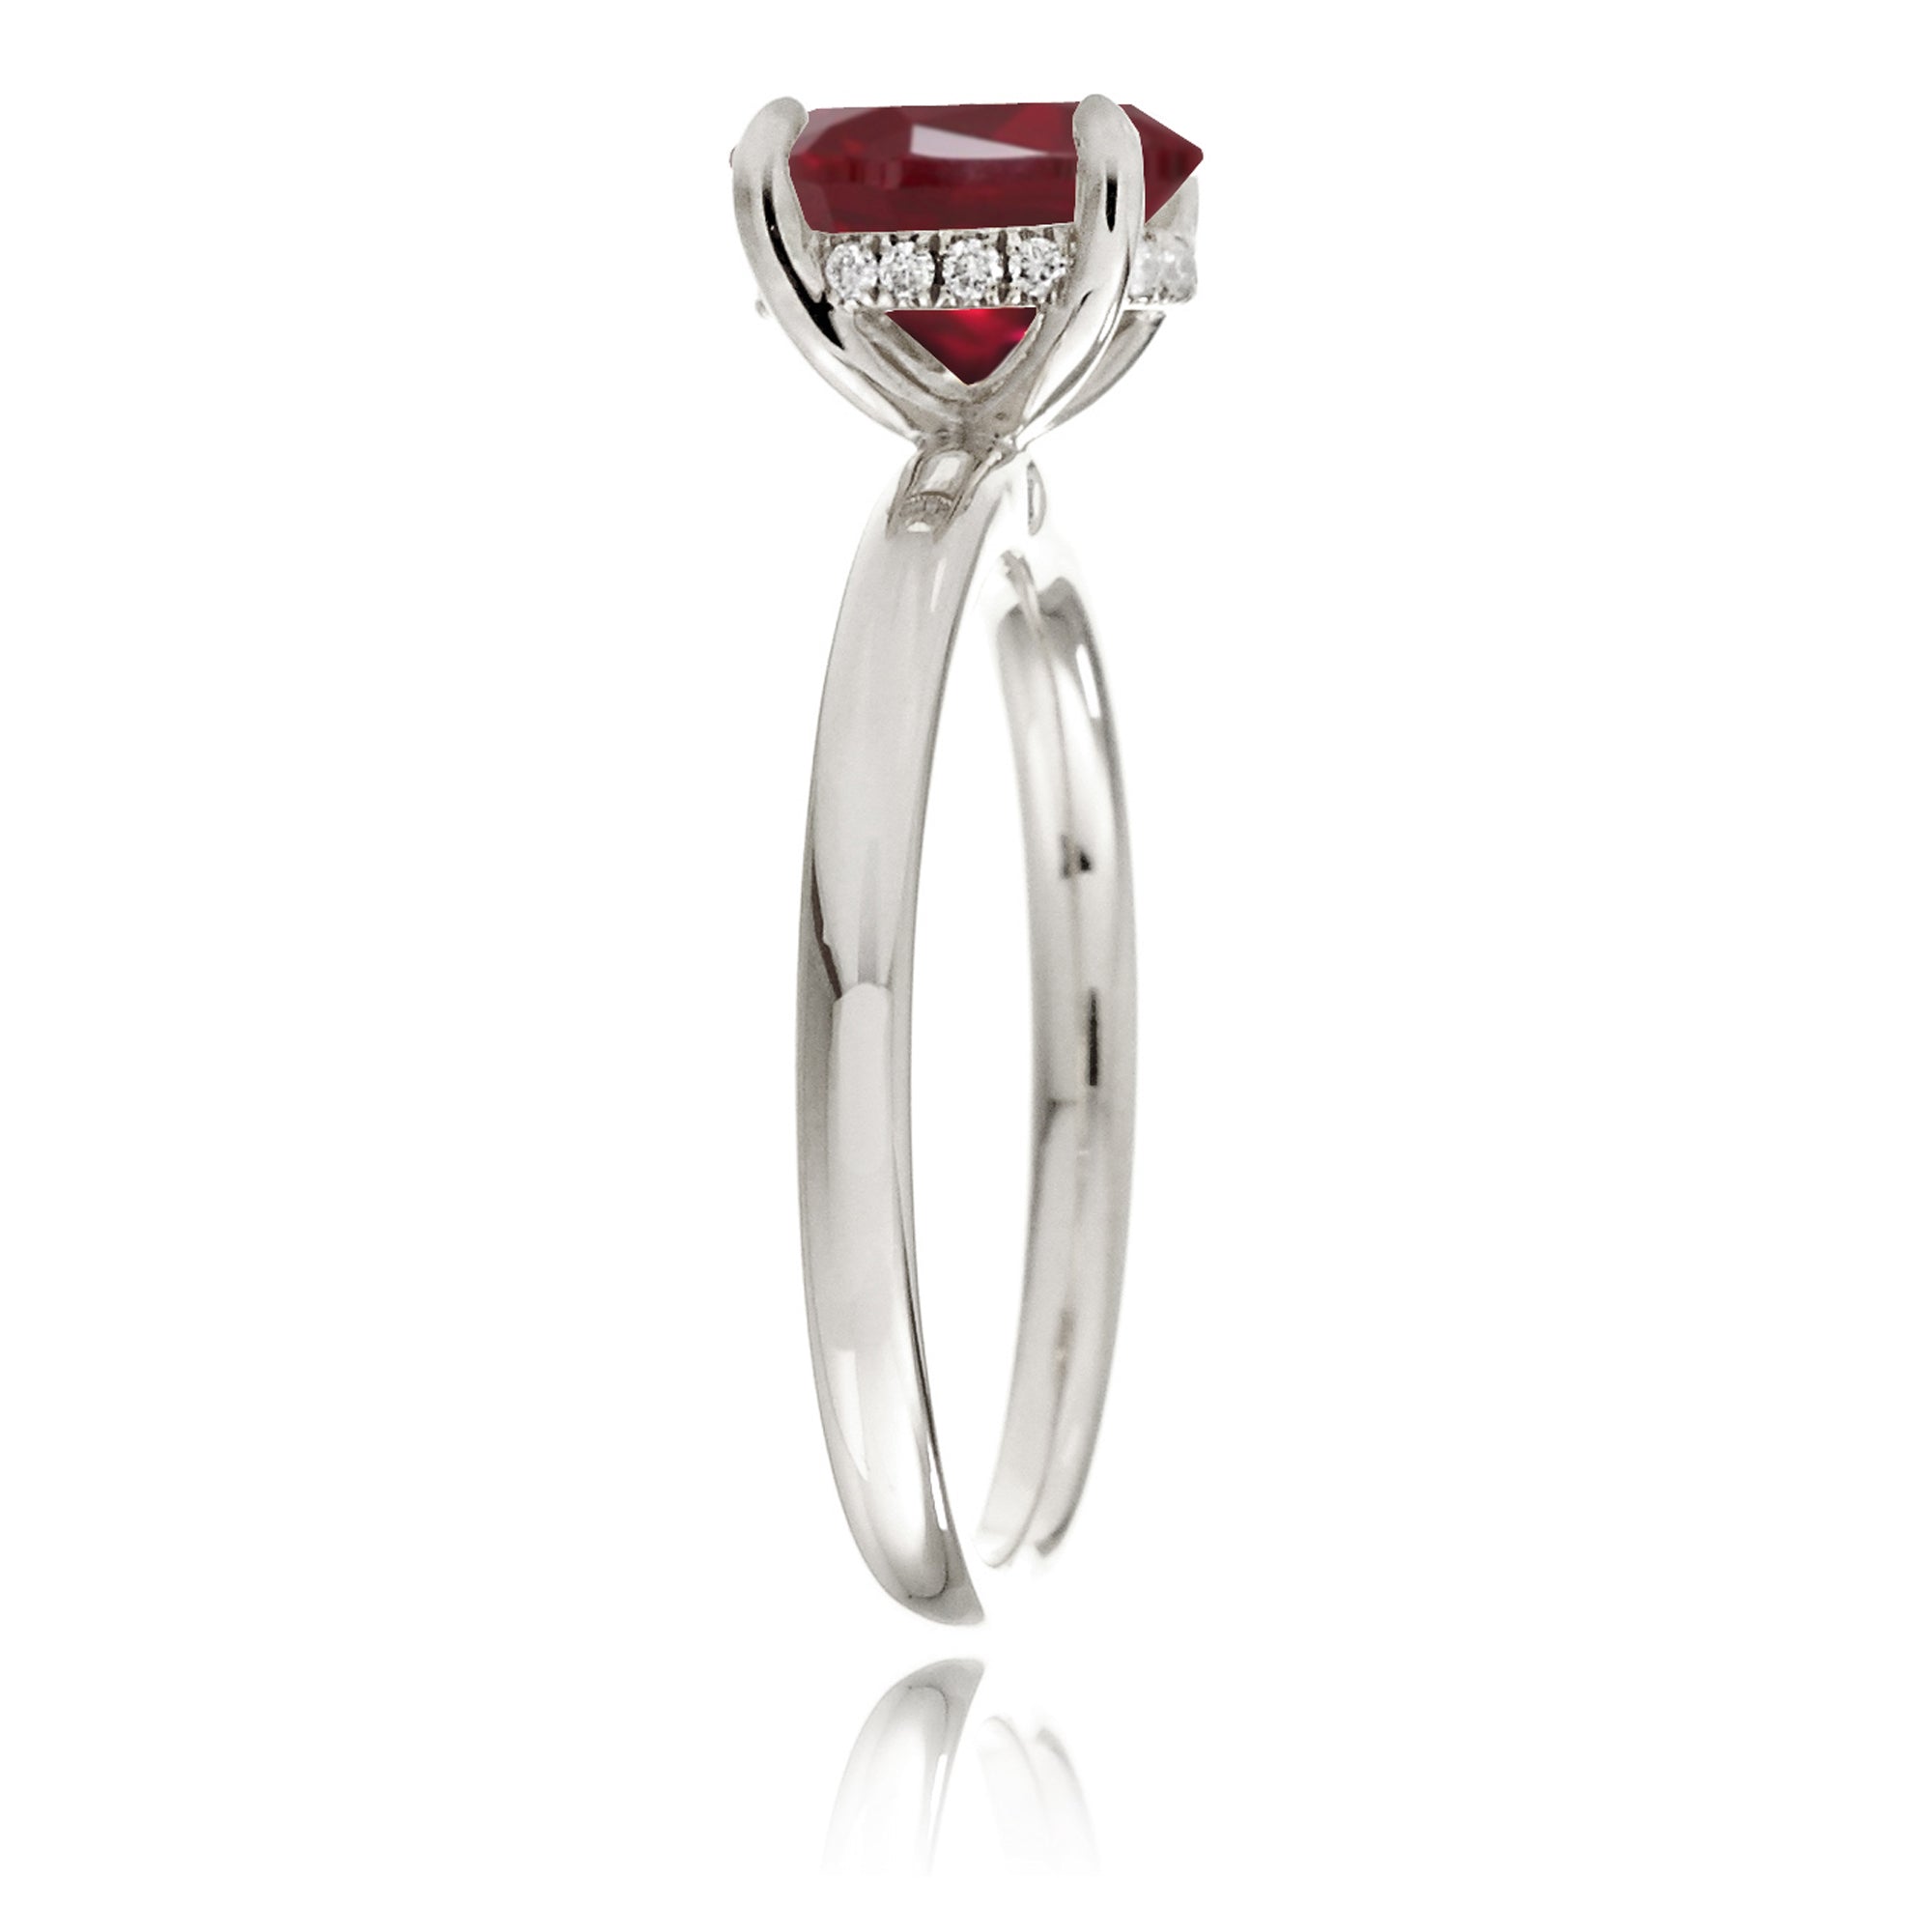 Emerald step cut ruby diamond hidden halo engagement ring in white gold